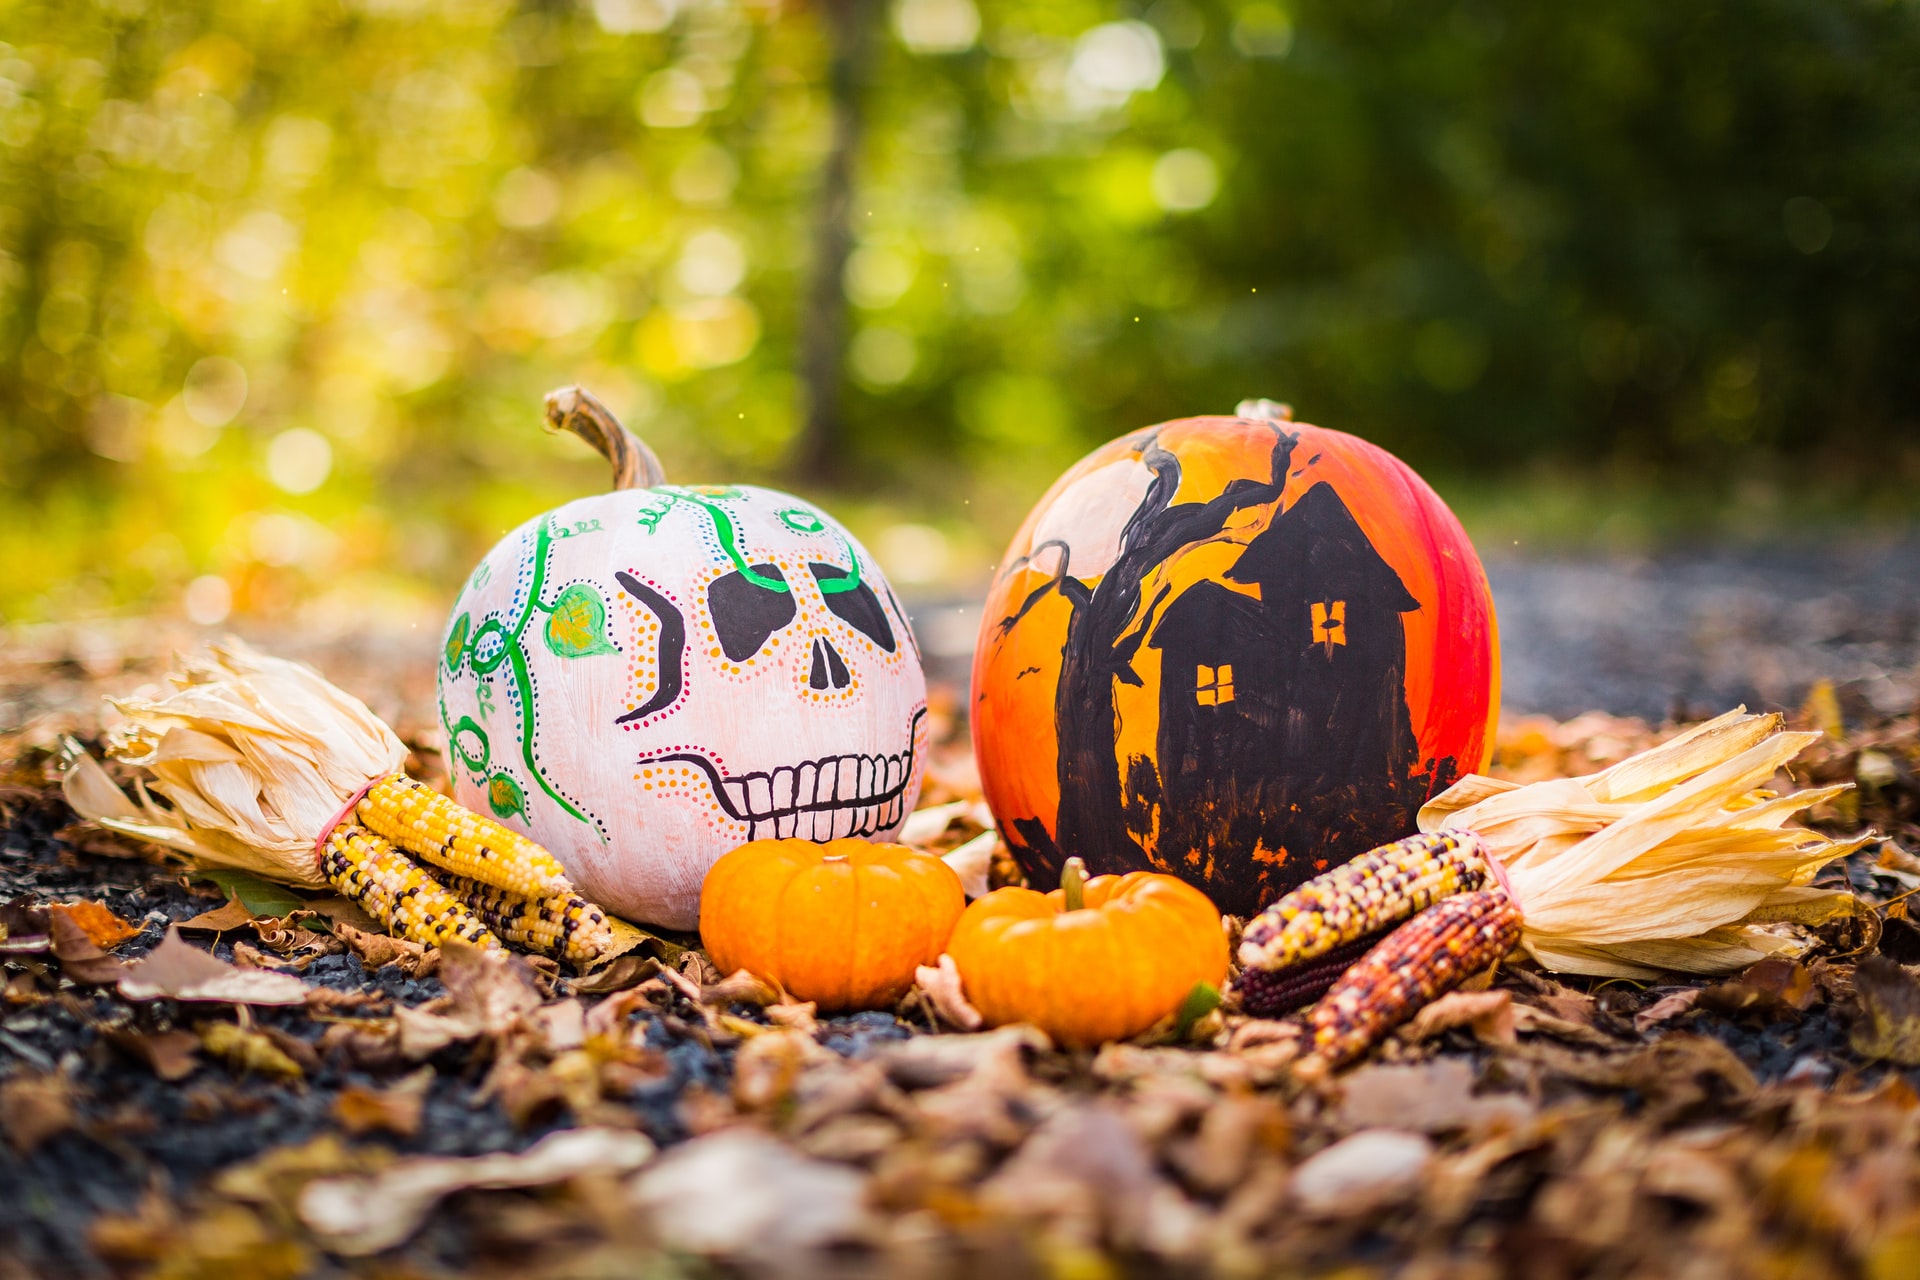 Pumpkins with drawings on them